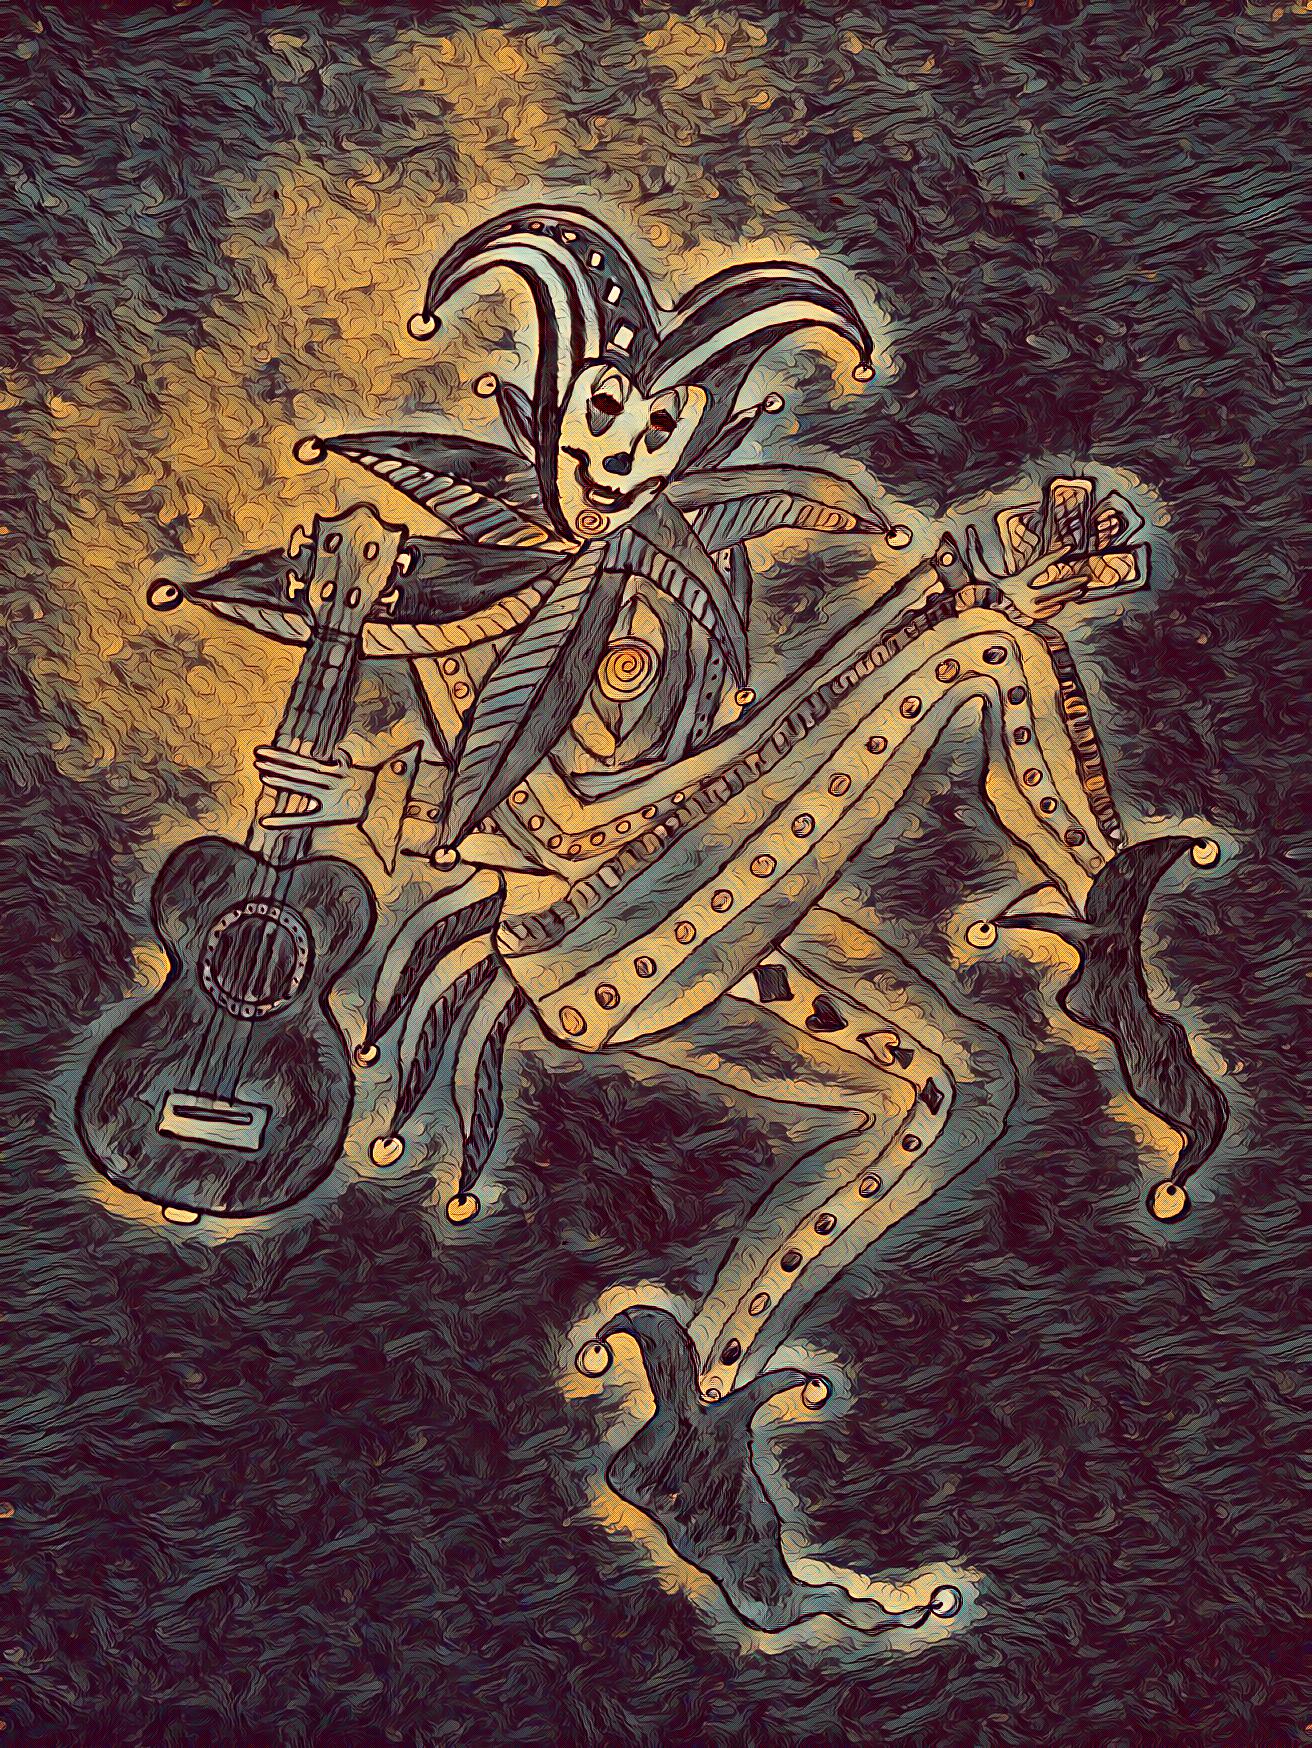 A black and copper image of the trickster carrying a guitar on his right hand and having one foot on the ground while the other one is in the air.